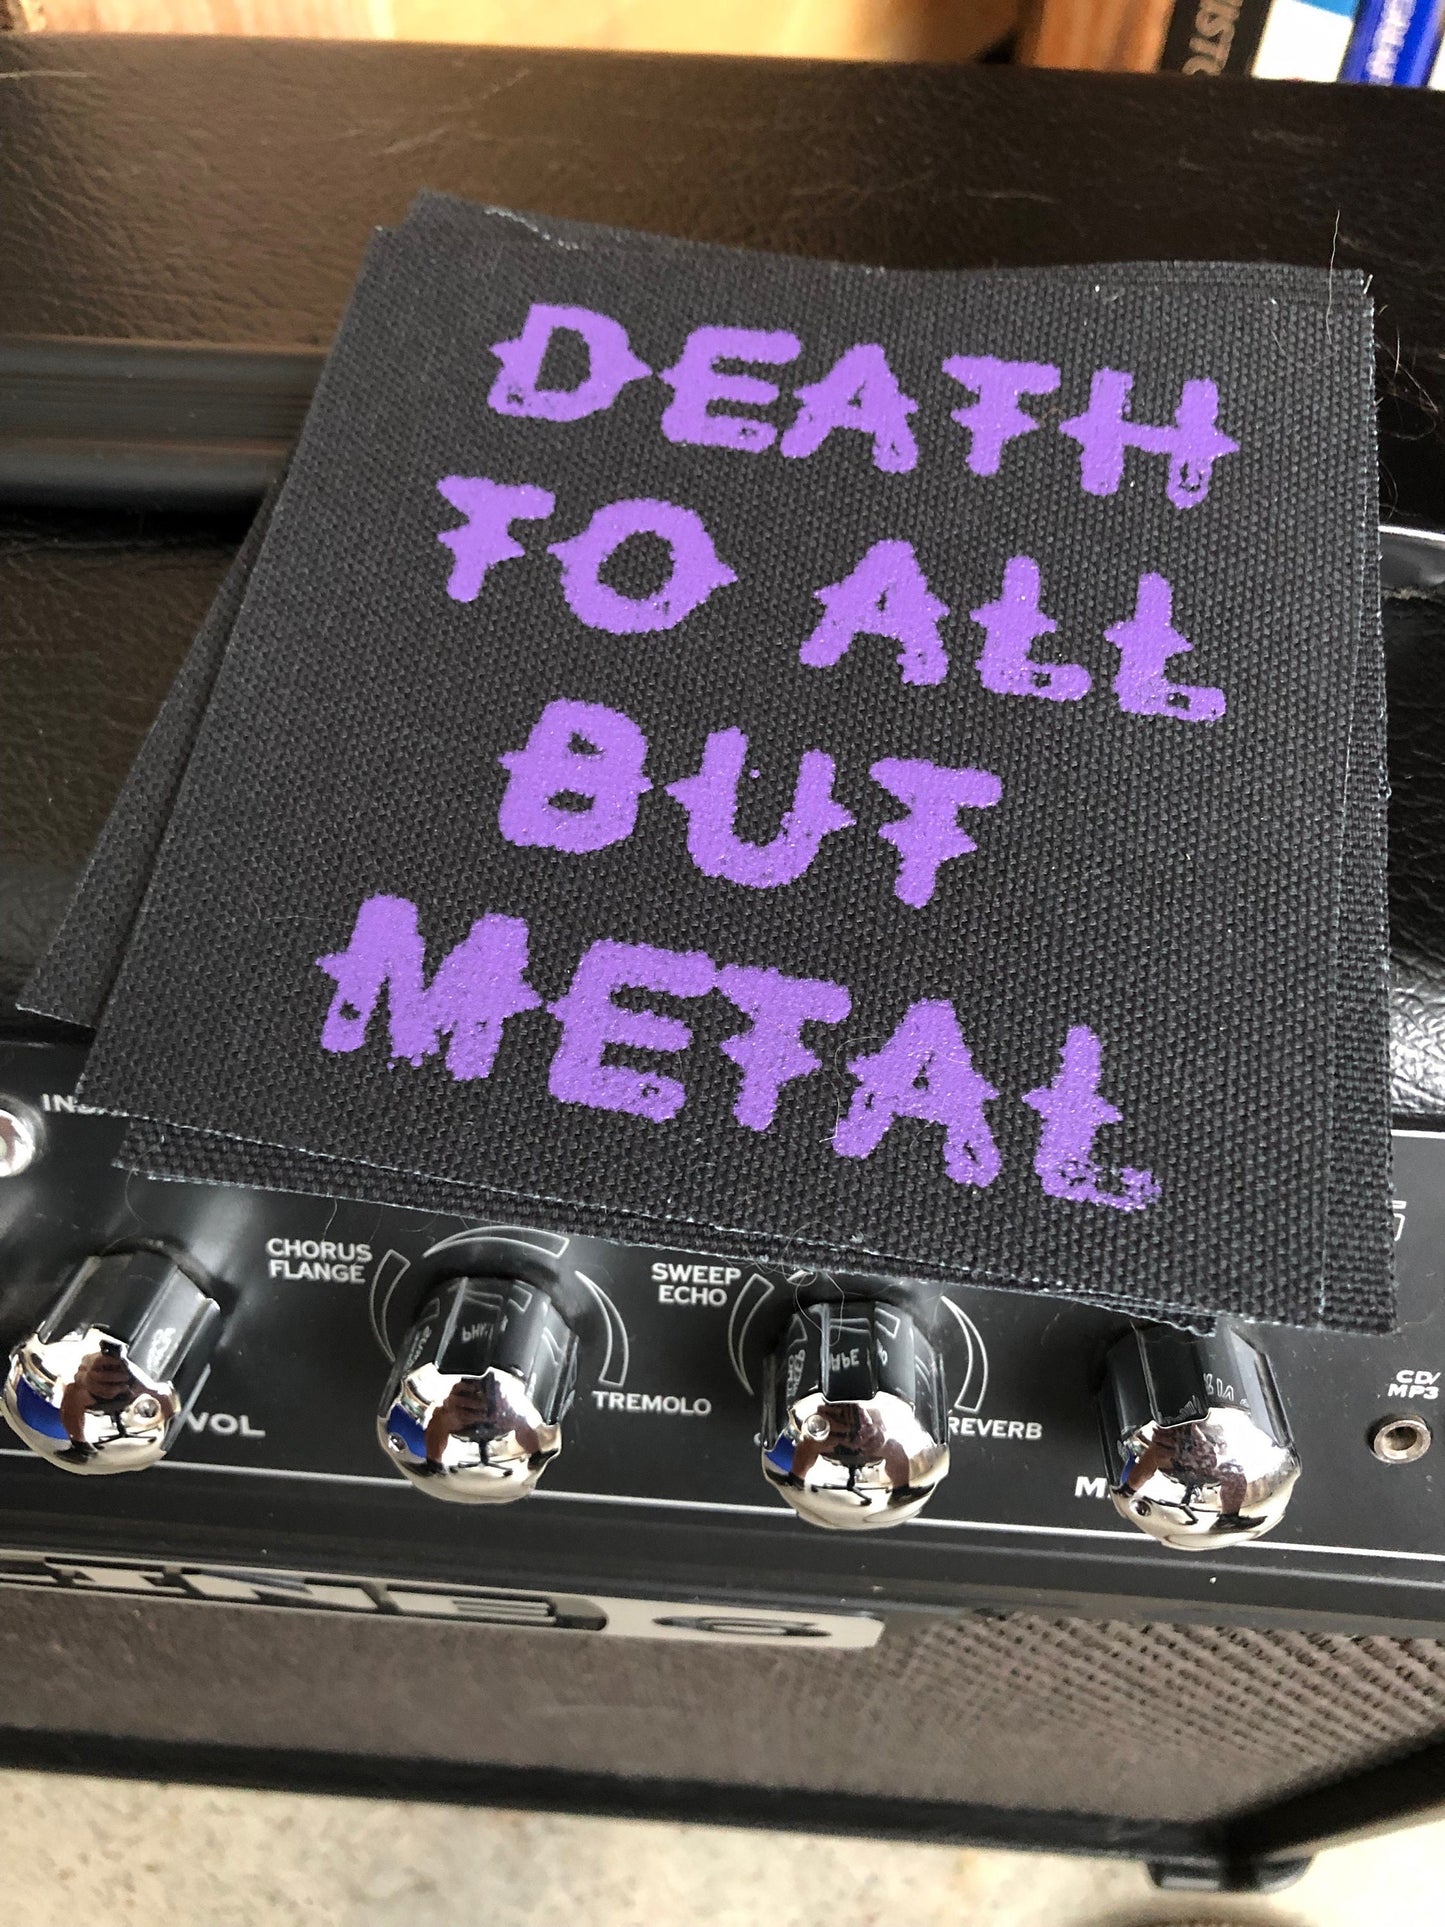 Death To All But Metal Patch